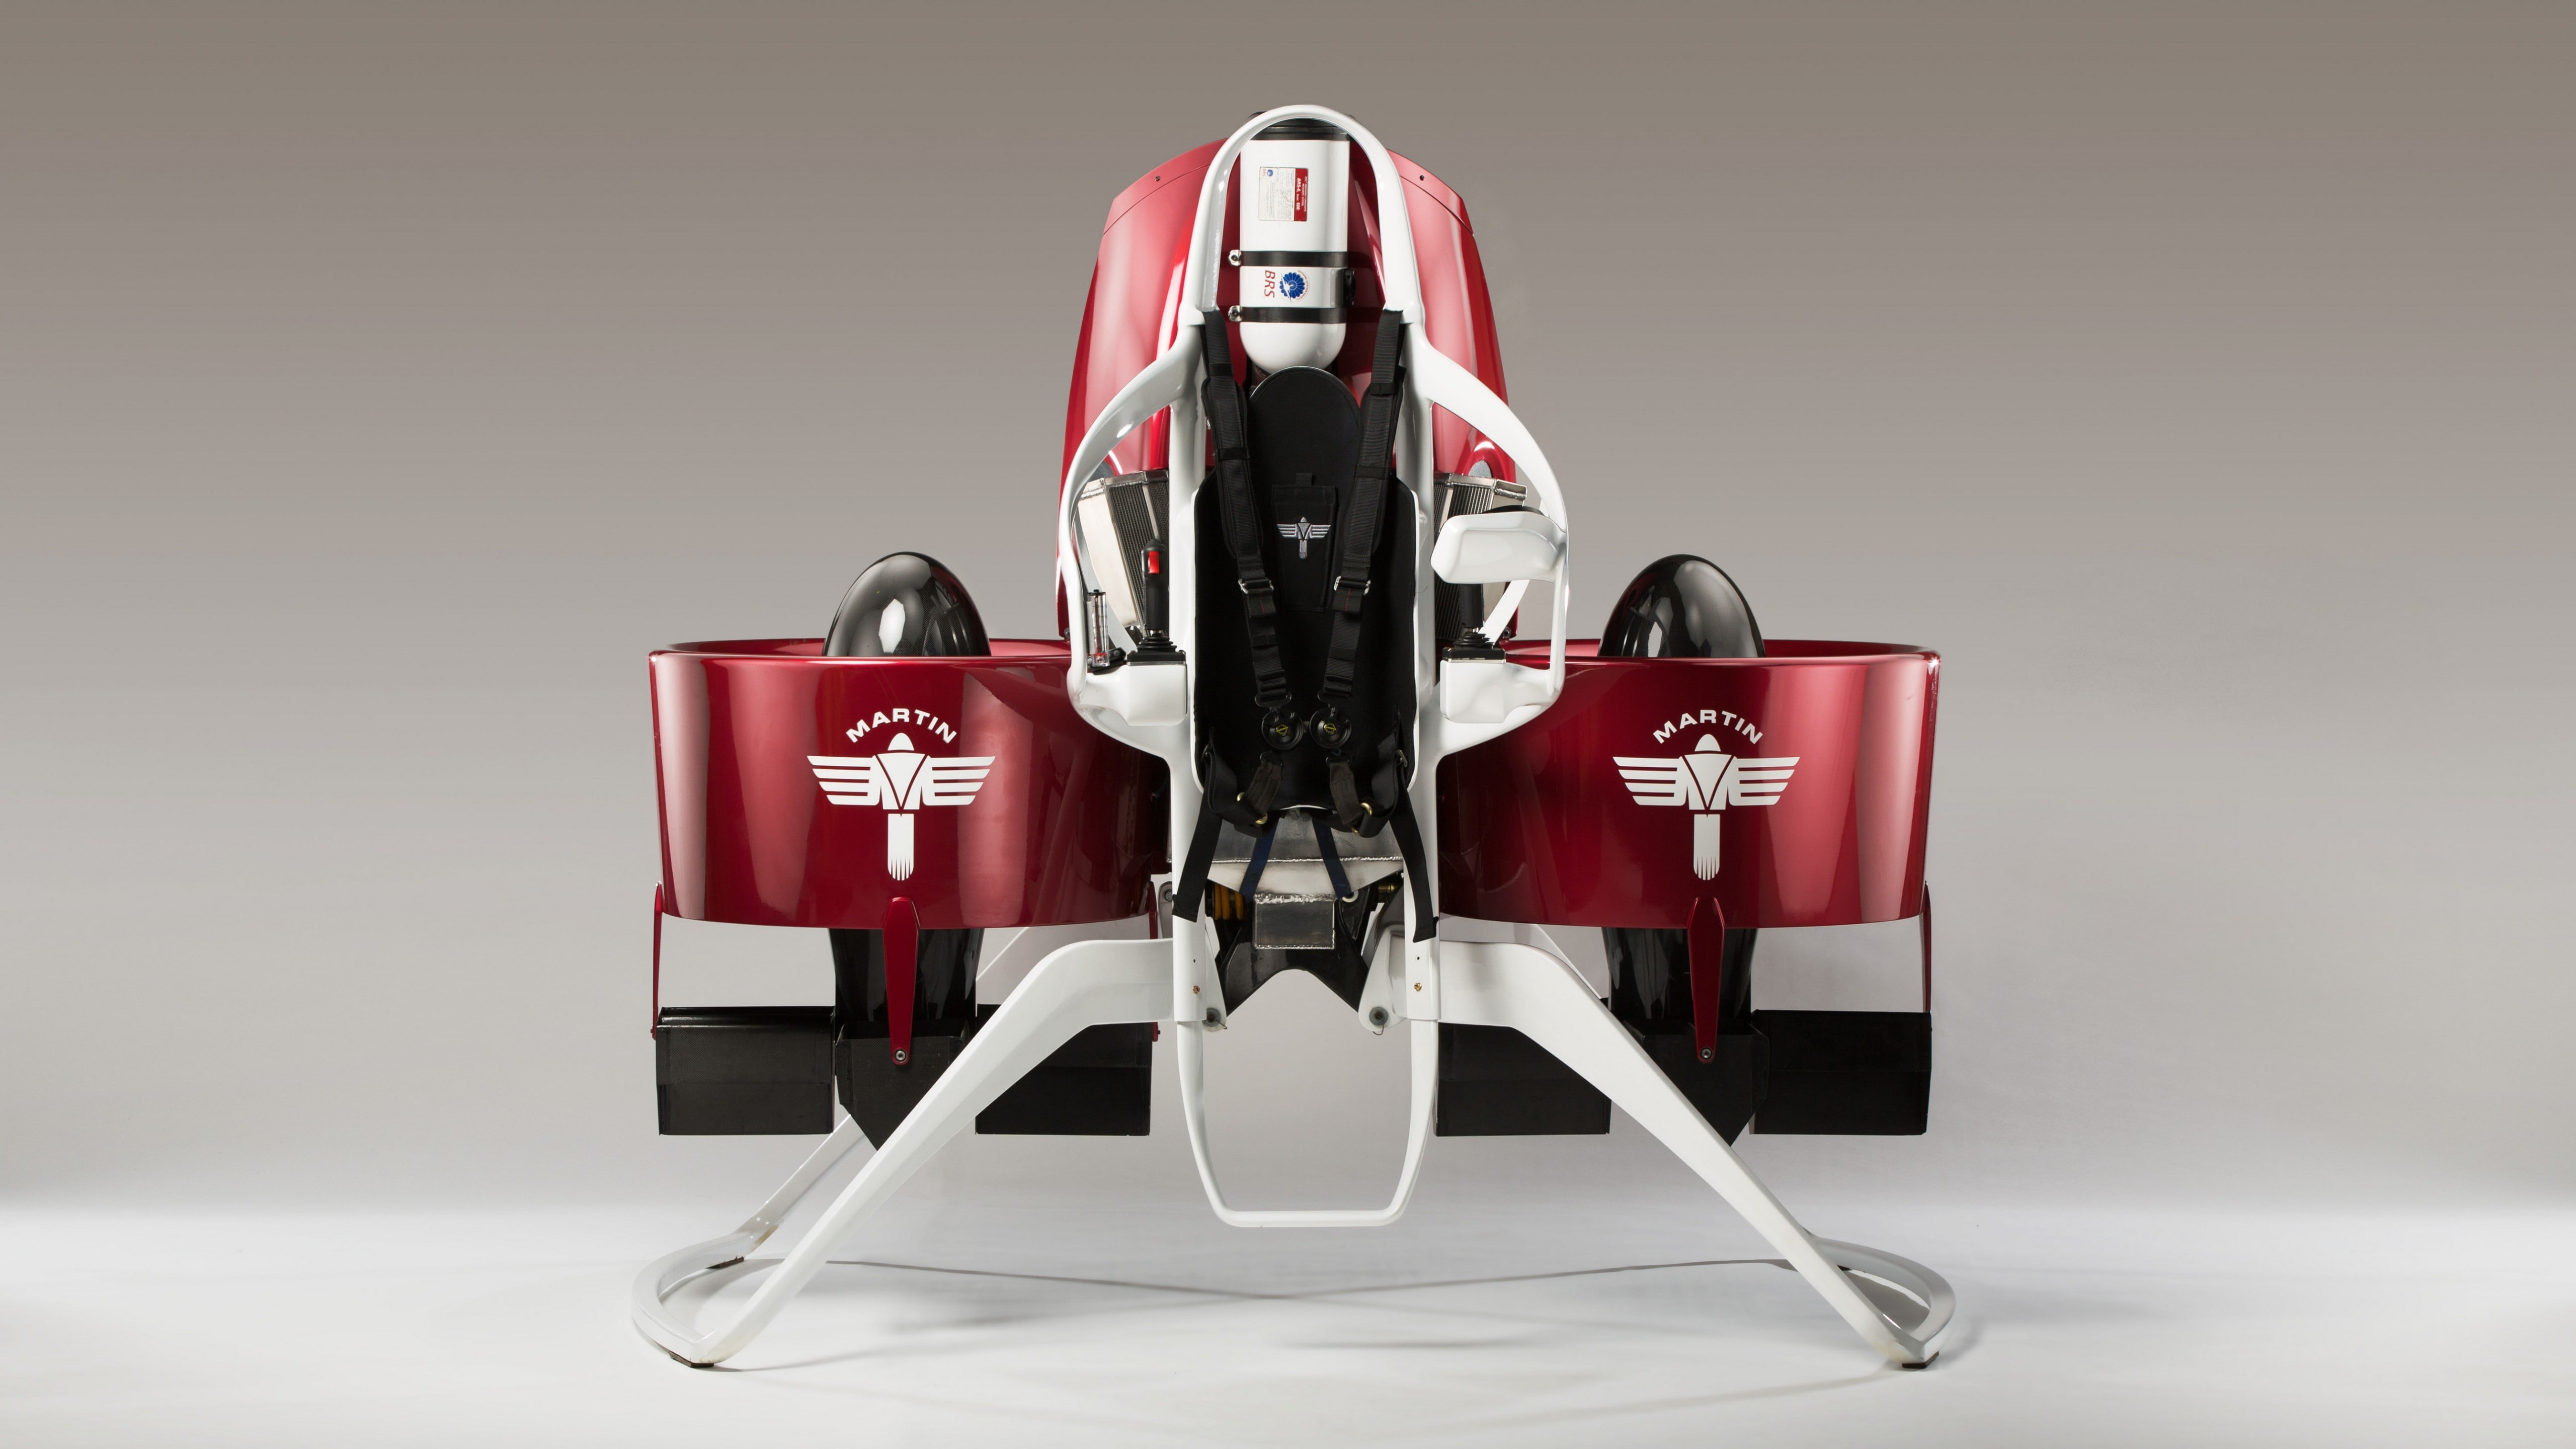 Martin Aircraft, IPO, jetpack, one-man, vehicle, limited edition